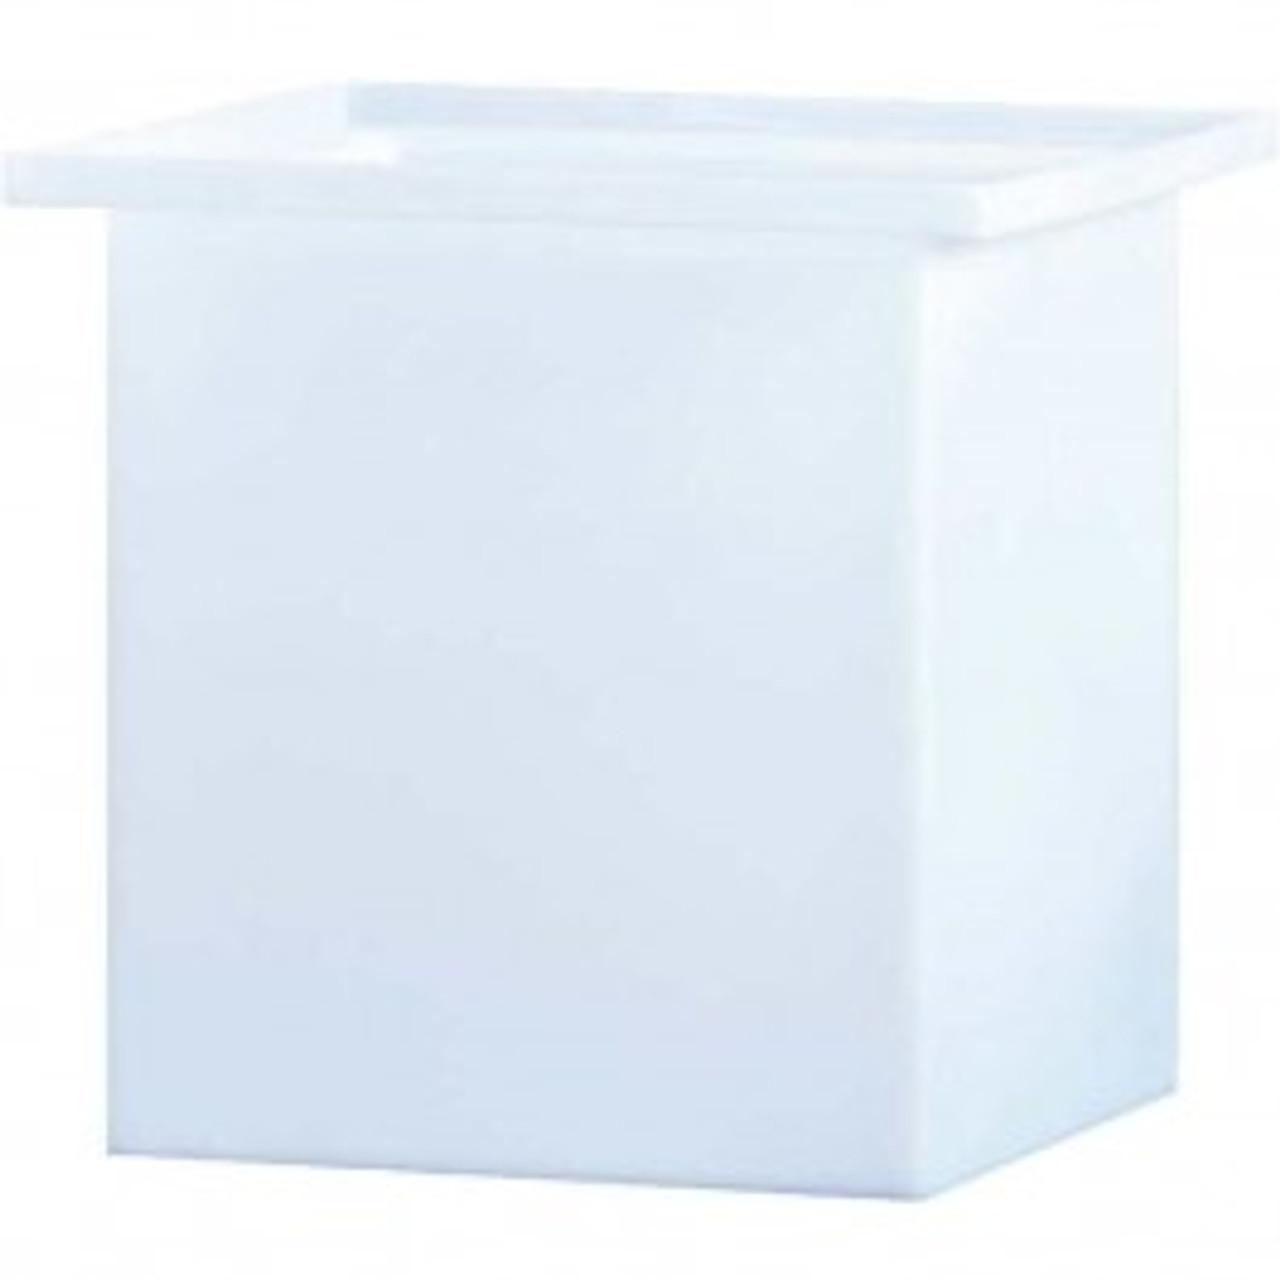 An image of a 2 Gallon PE Chem-Tainer White Rectangular Open Top Tank | R080808A